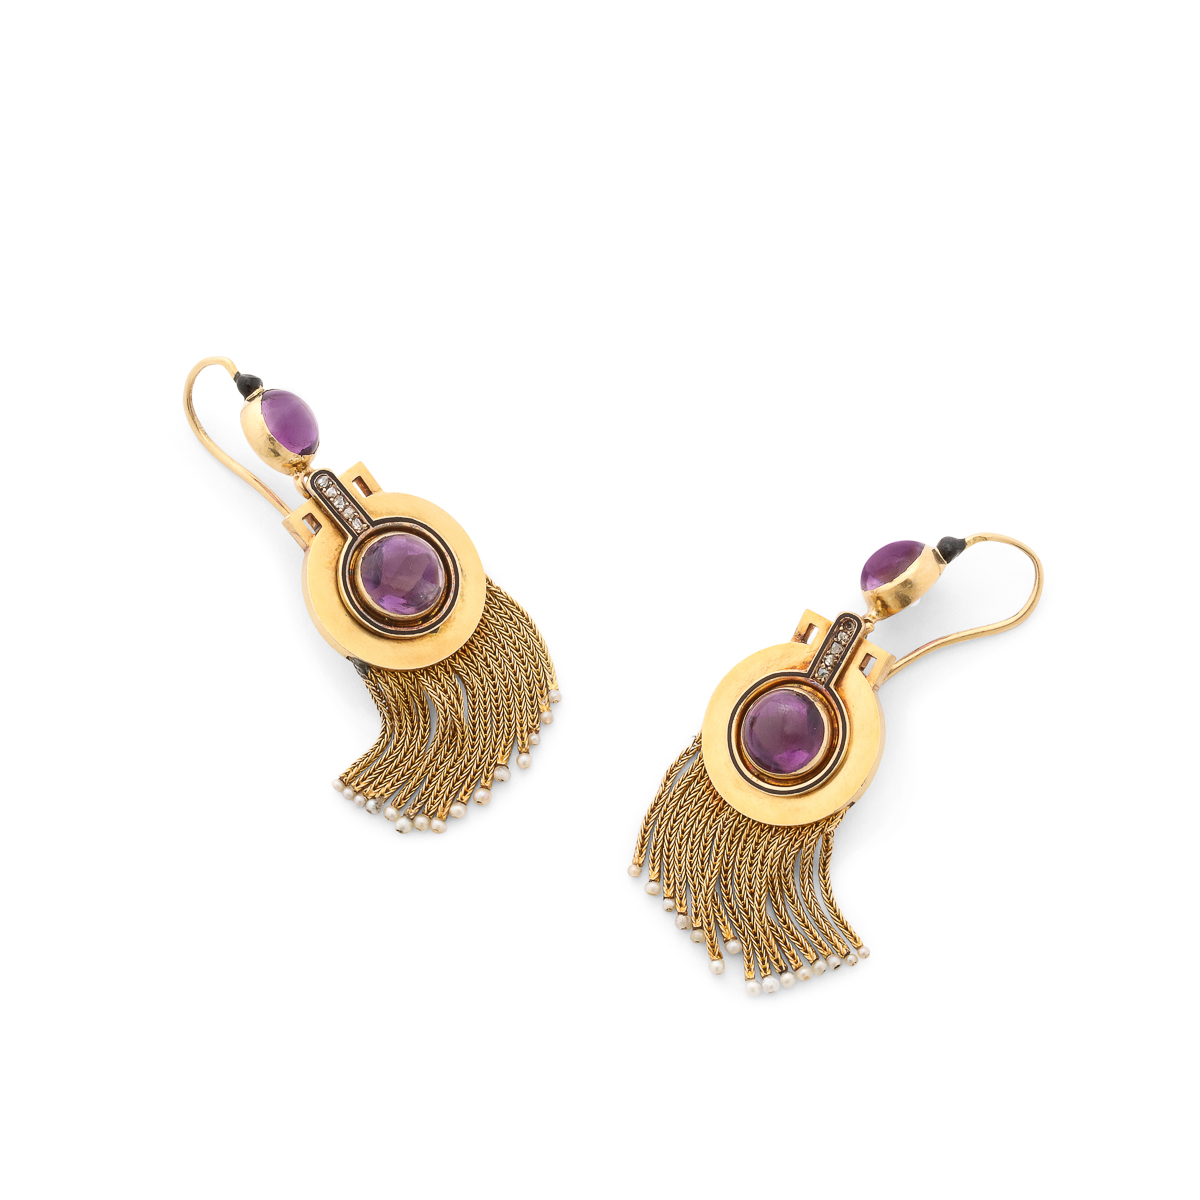 other view of gold, amethyst, diamond, and black enamel fringe earrings, illustrating the articulation of the fringe